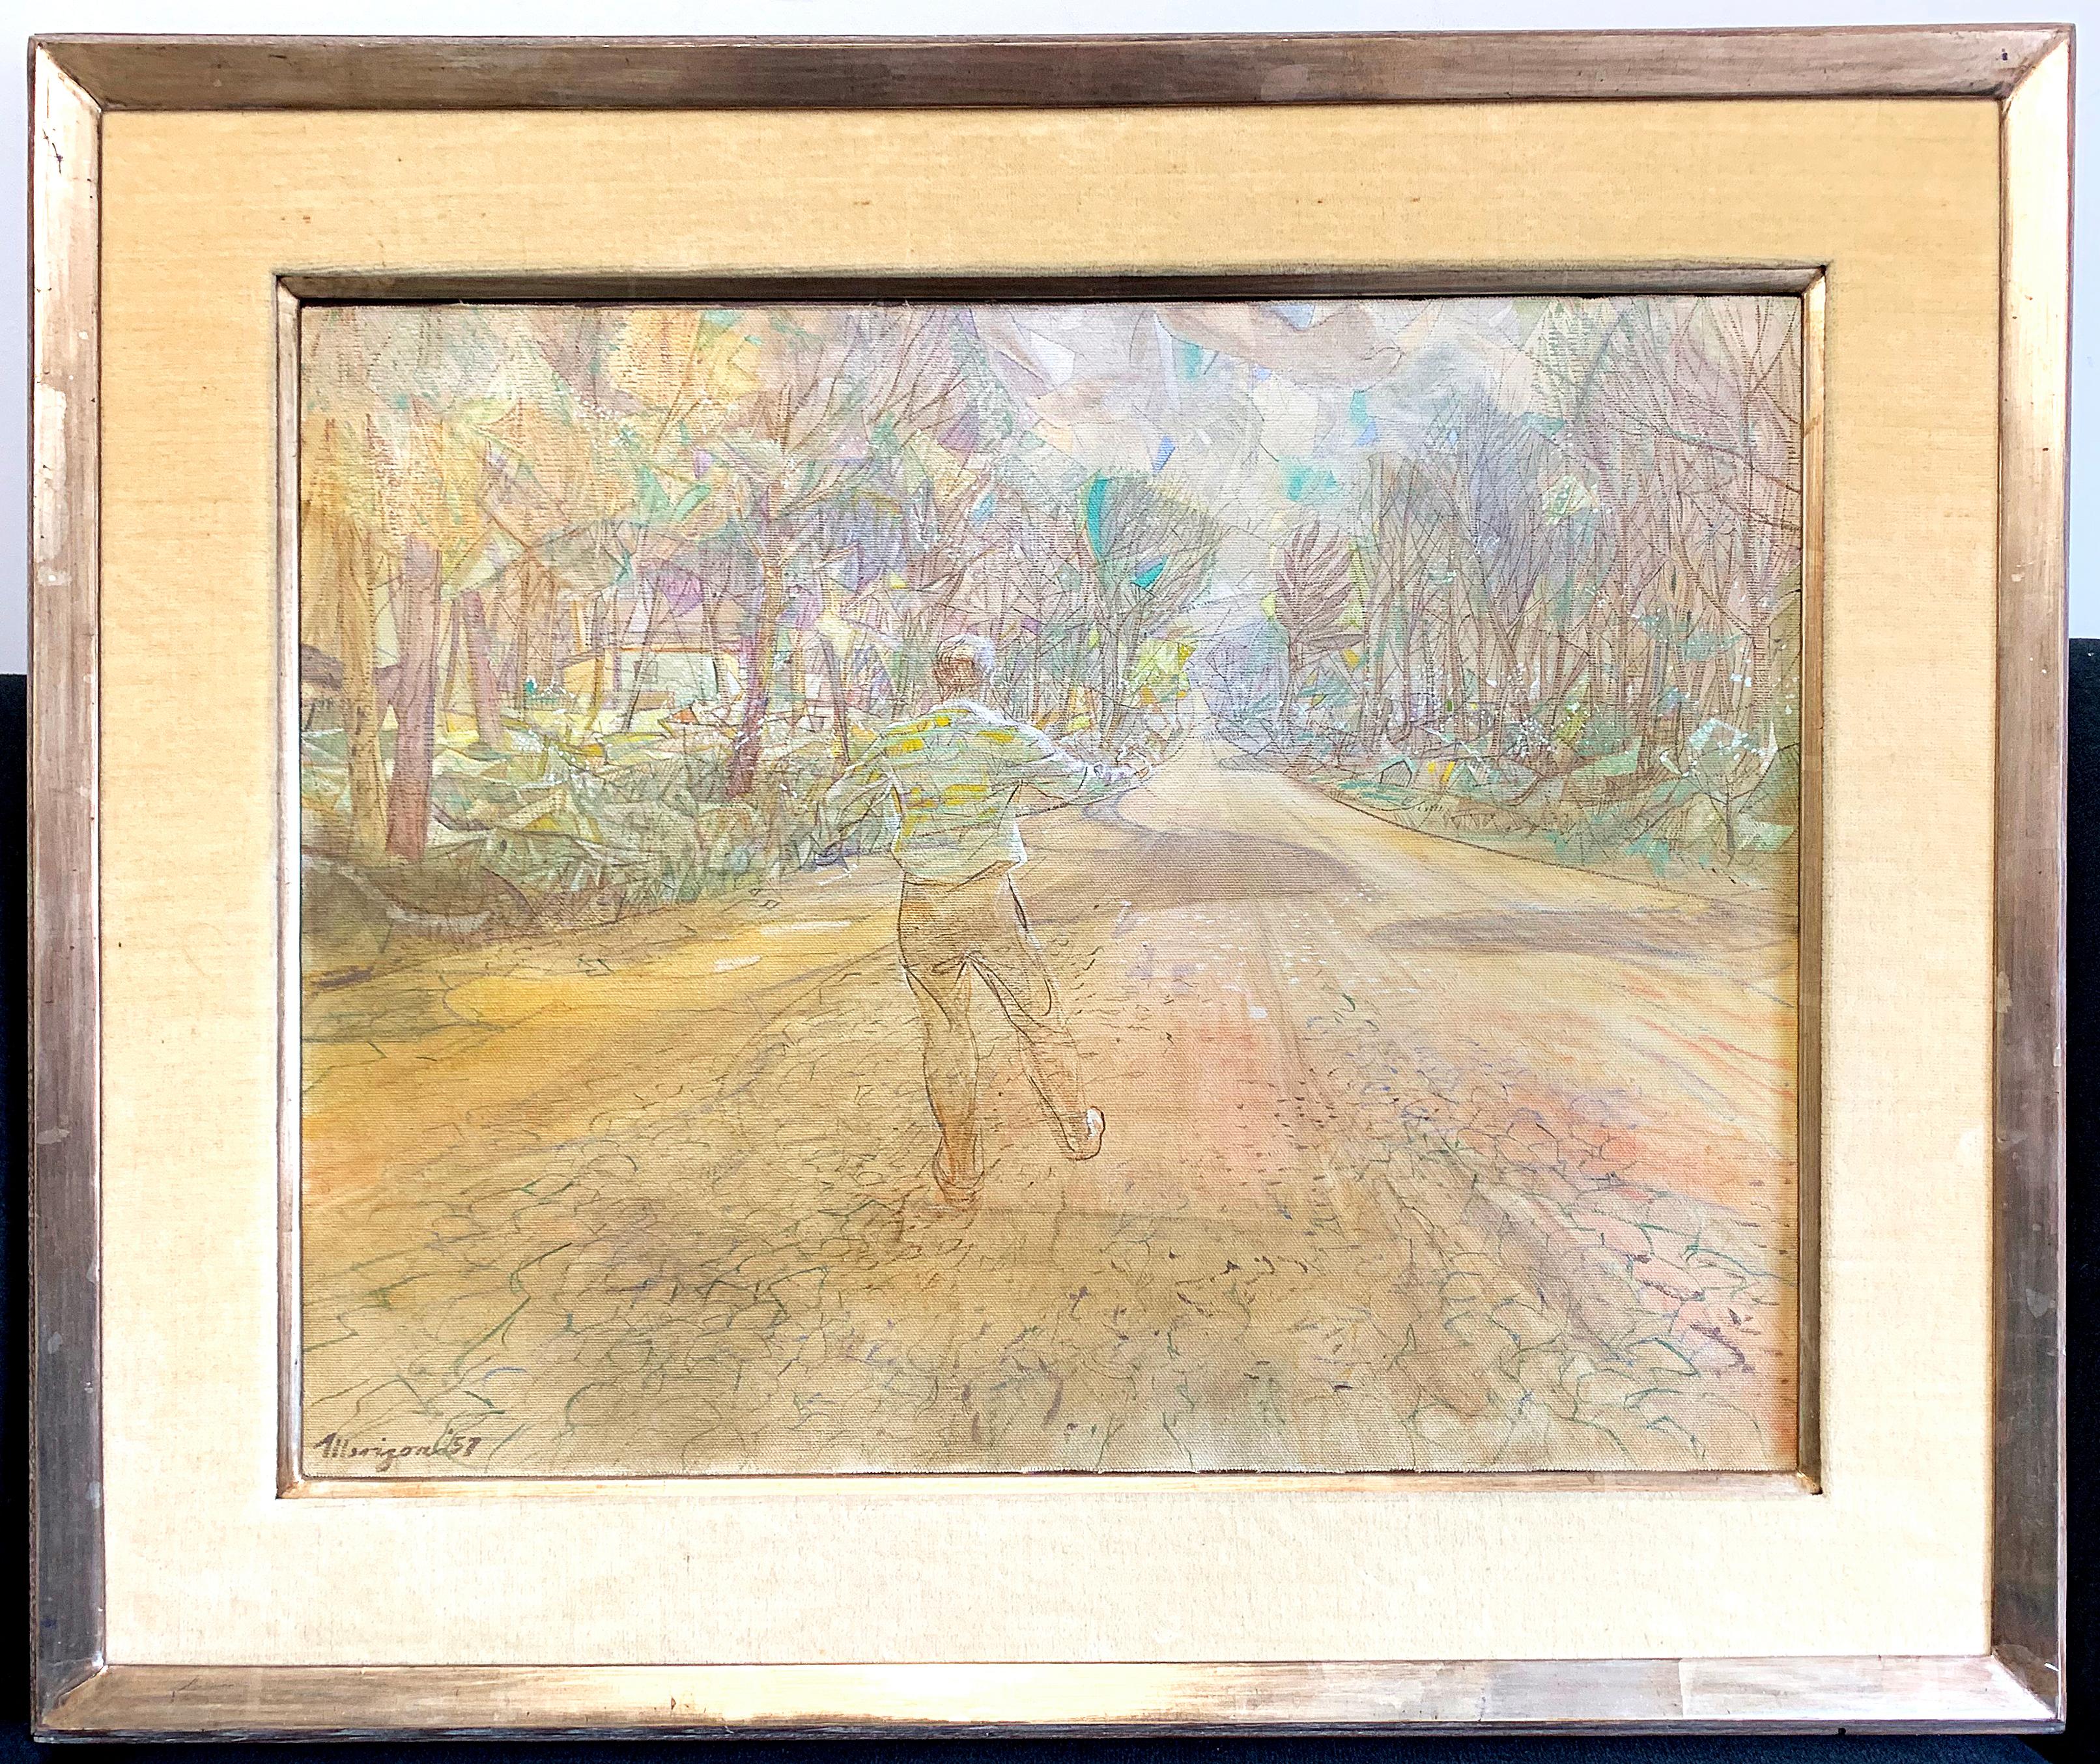 An early and important painting by renowned Grand Rapids artist Armand Merizon, this work depicts a ghostly figure -- reputedly the son of a dear family friend -- in the midst of the natural landscape Merizon loved. Although the artist lived most of